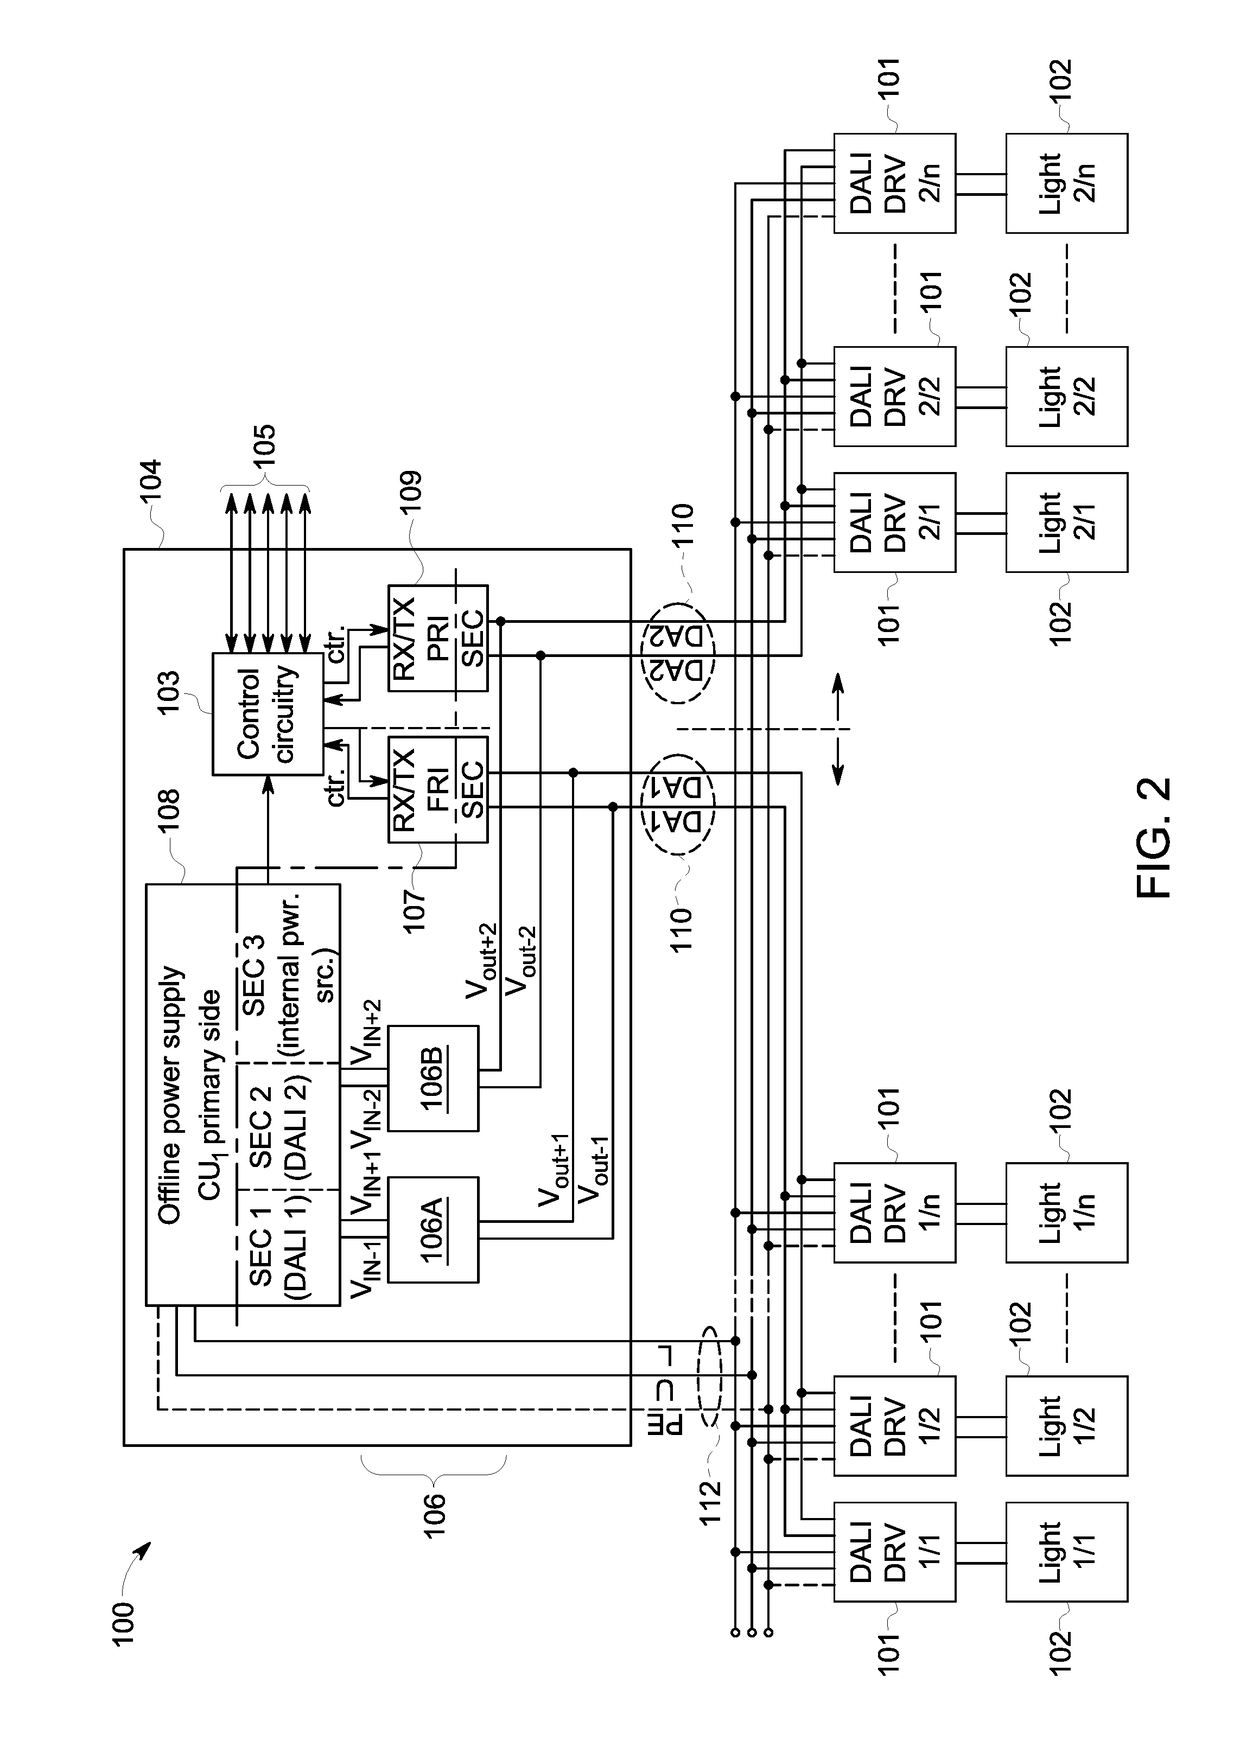 Protection circuit assembly and method